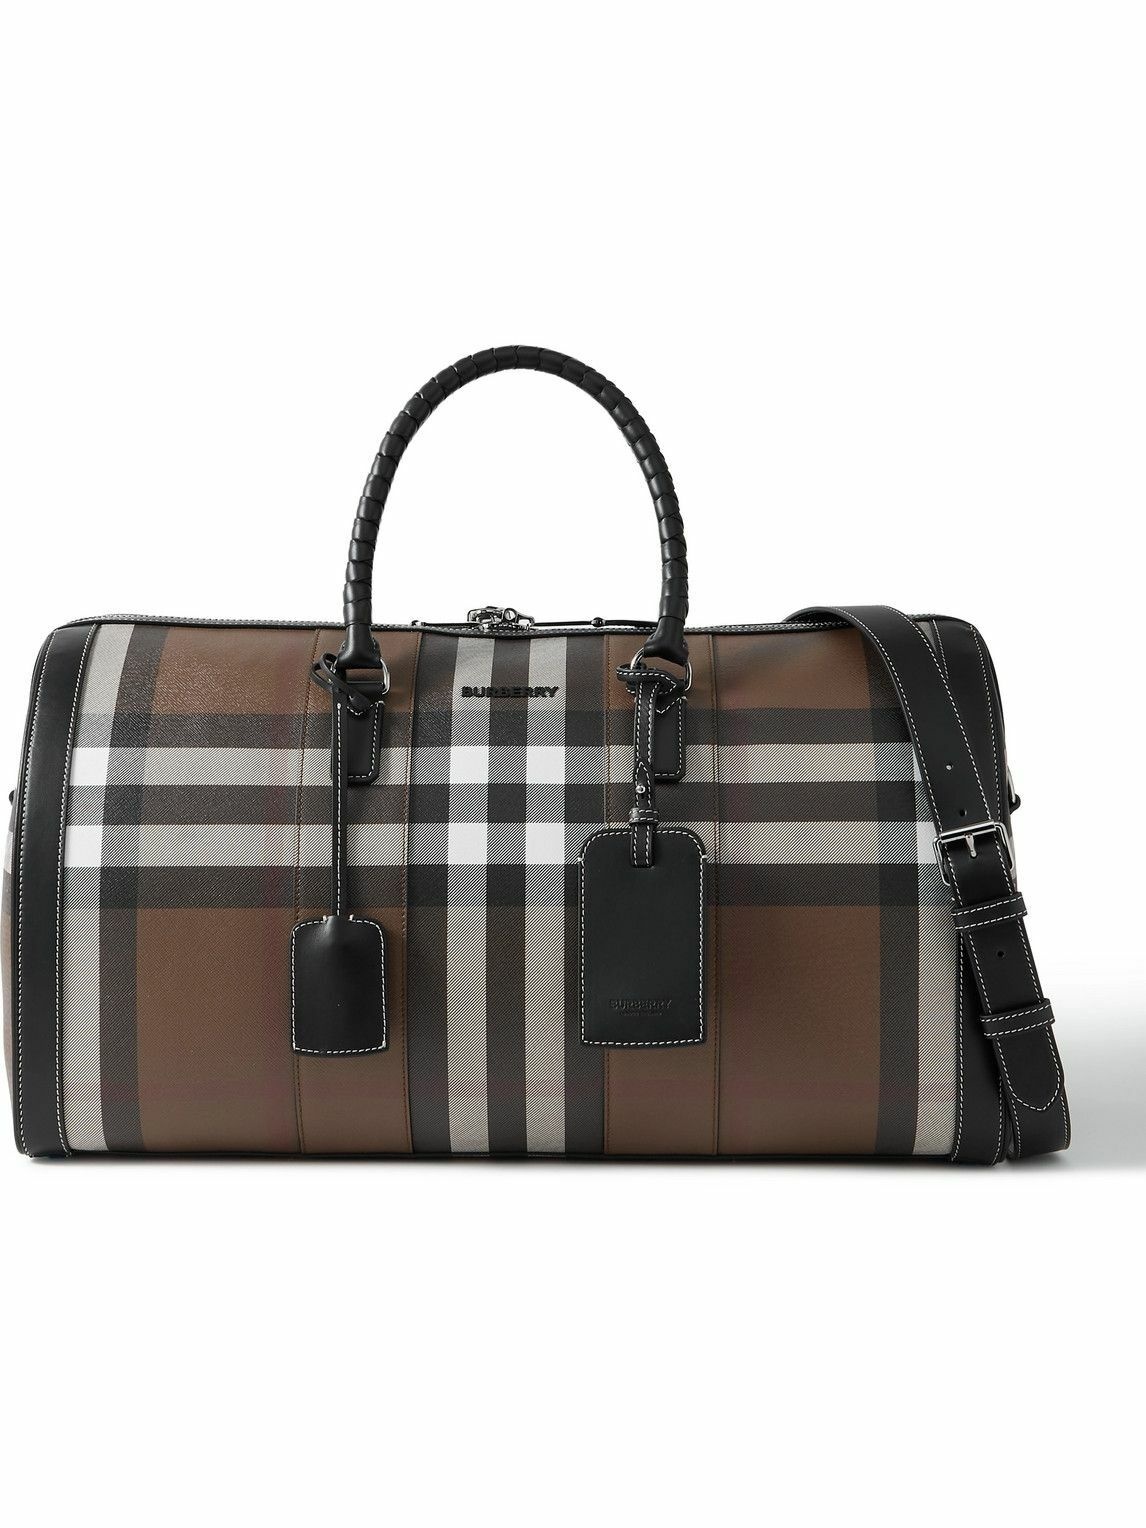 Burberry - Leather-Trimmed Checked E-Canvas Weekend Bag Burberry